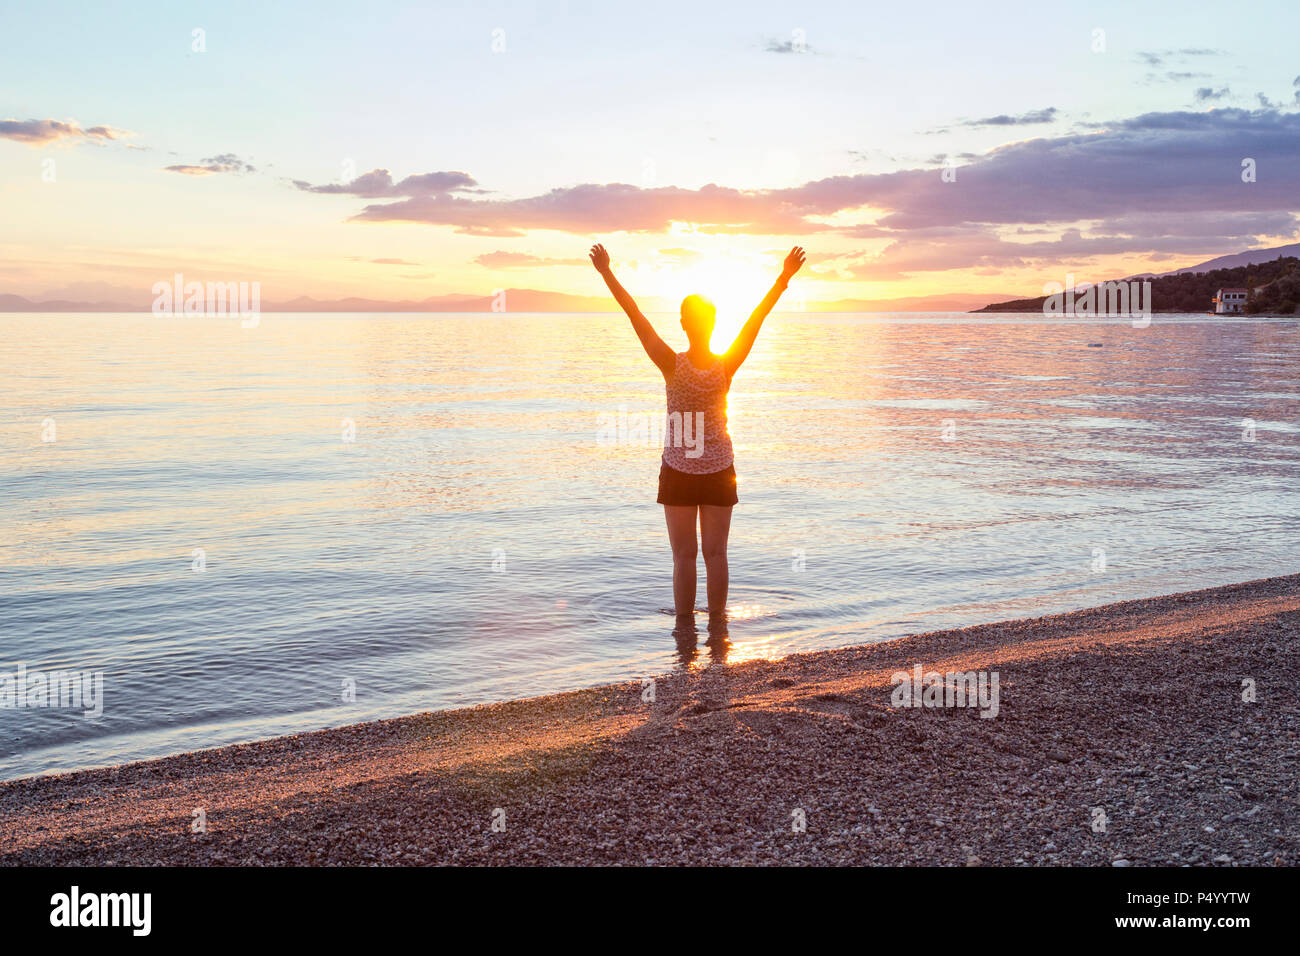 Greece, Pelion, Pagasetic Gulf, woman on the beach with raised arms at sunset, Kalamos in the background Stock Photo